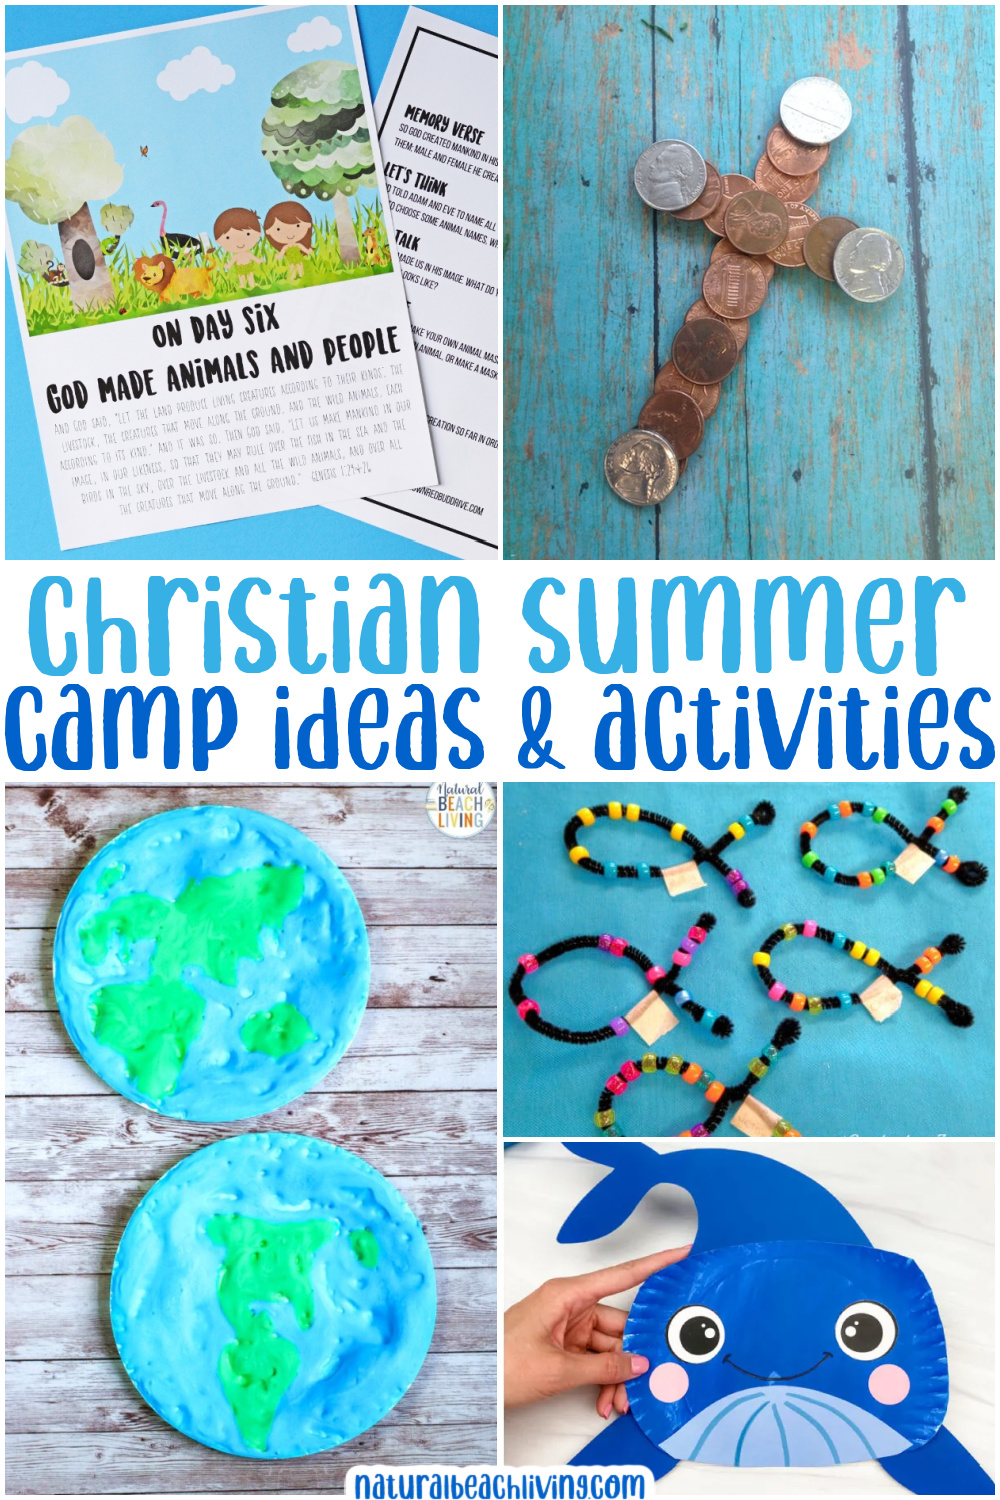 If you're looking for some great Christian Summer Camp Themes you've come to the right place! We have a variety of fun and faith-focused ideas that will engage and delight your campers. From Christian crafts and snacks to Bible games and activities, we have everything you need to create an amazing summer camp experience. 